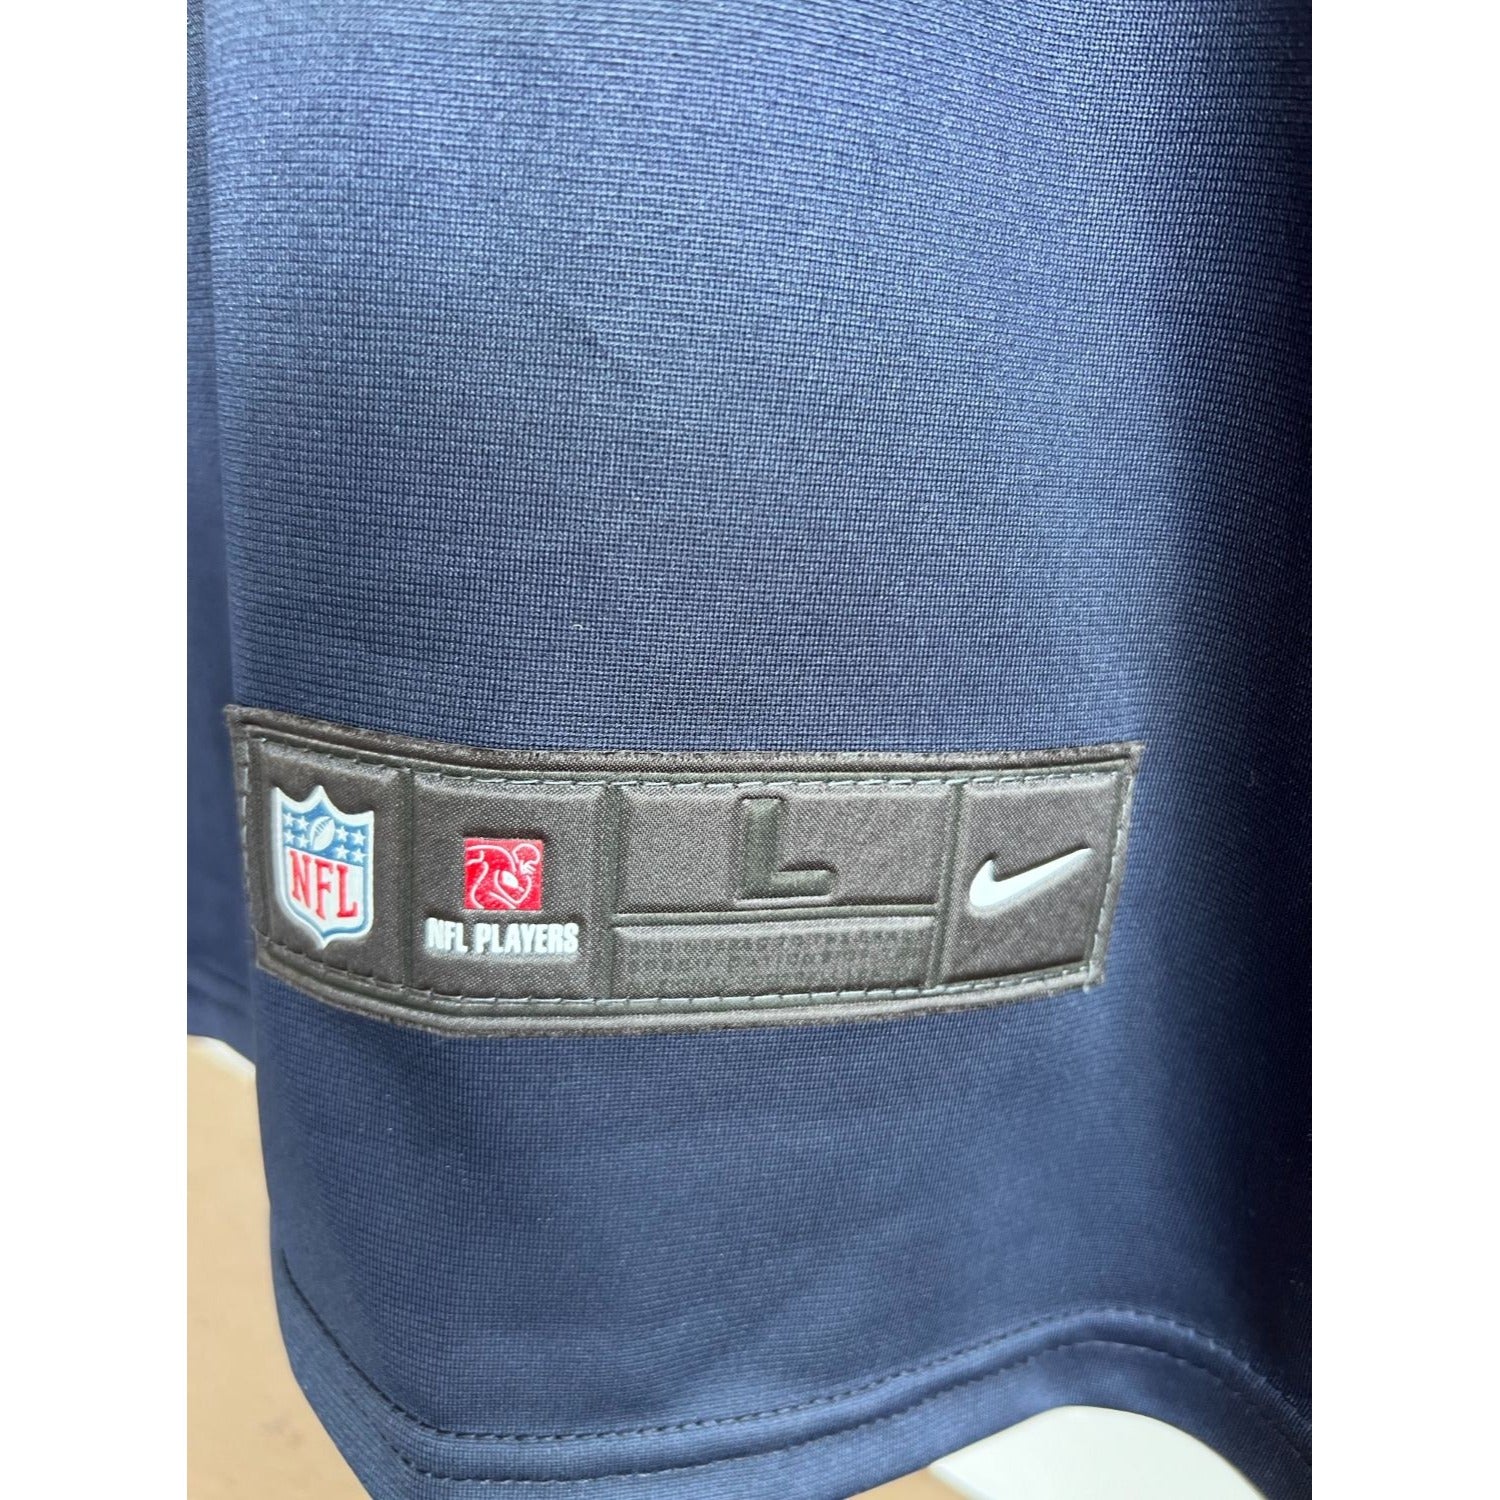 Derrick Henry Tennessee Titans game model Nike size large jersey signed with proof